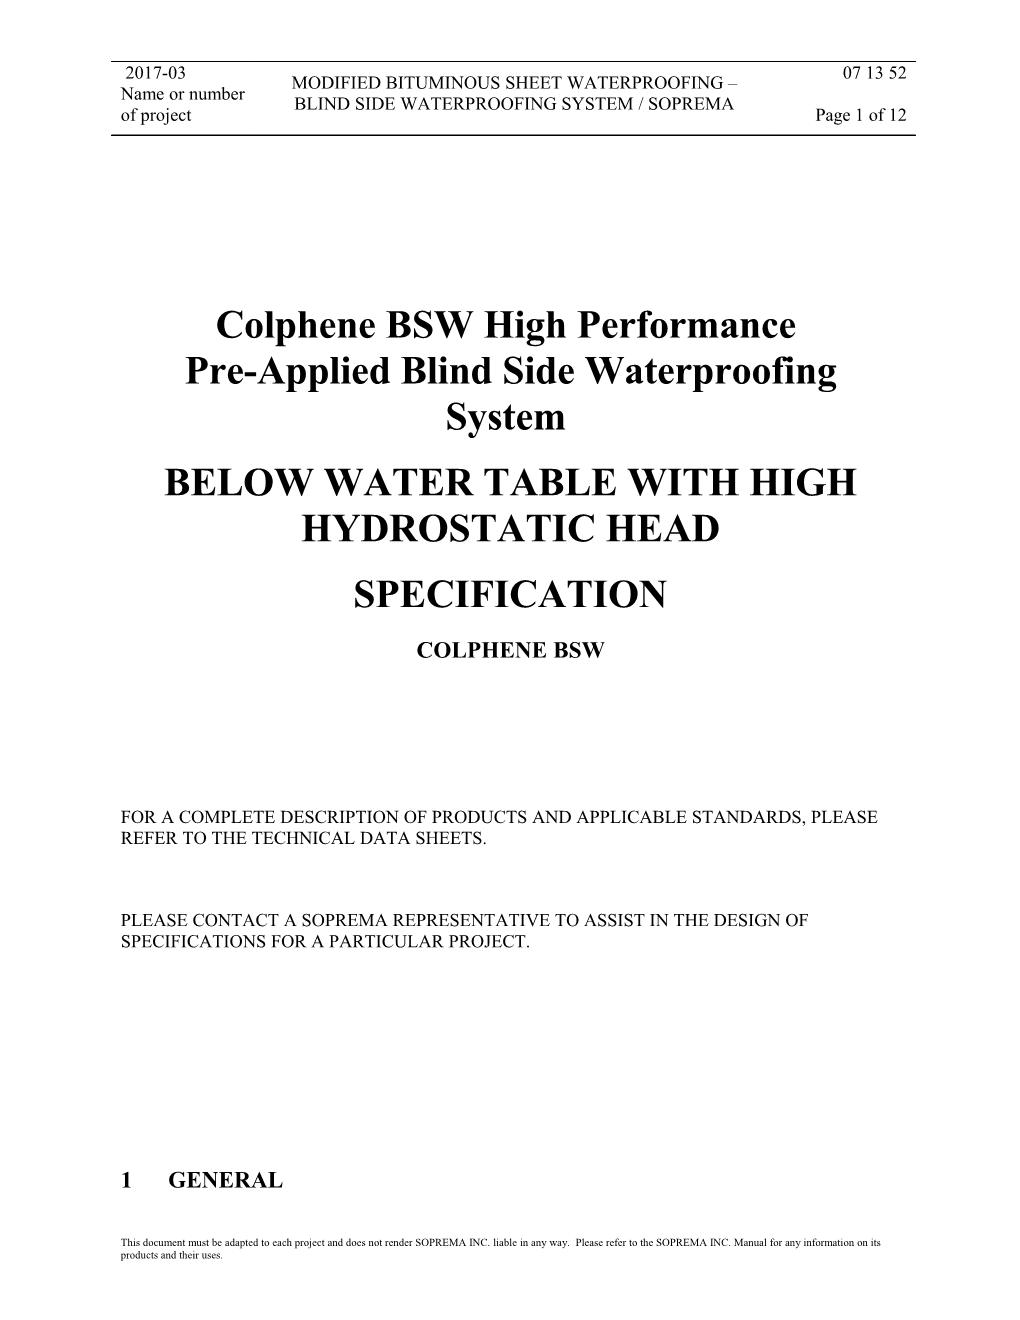 Below Water Table with High Hydrostatic Head